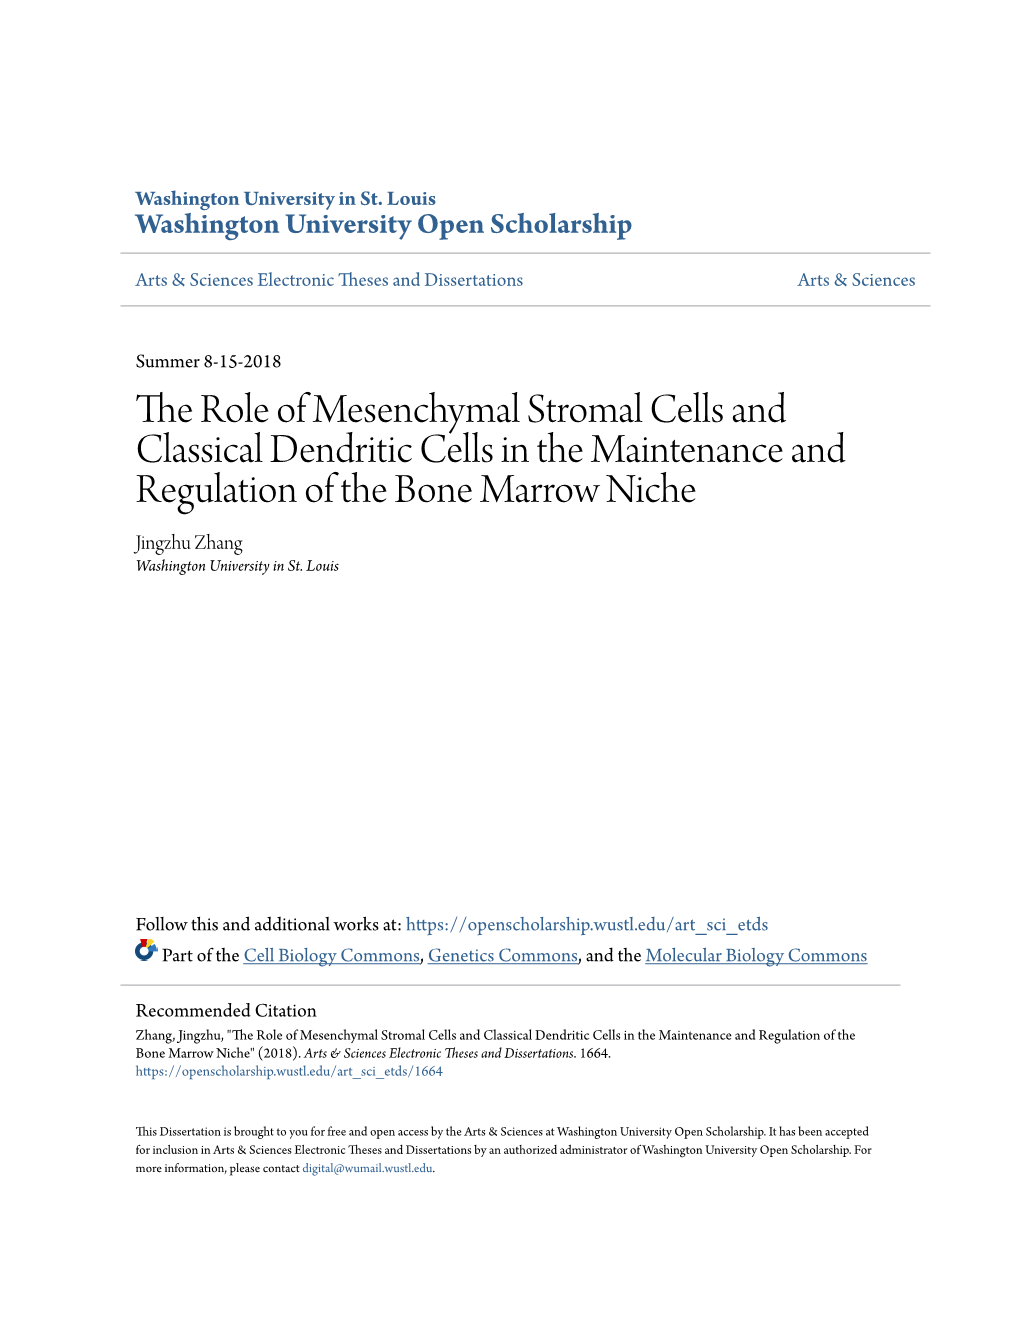 The Role of Mesenchymal Stromal Cells and Classical Dendritic Cells